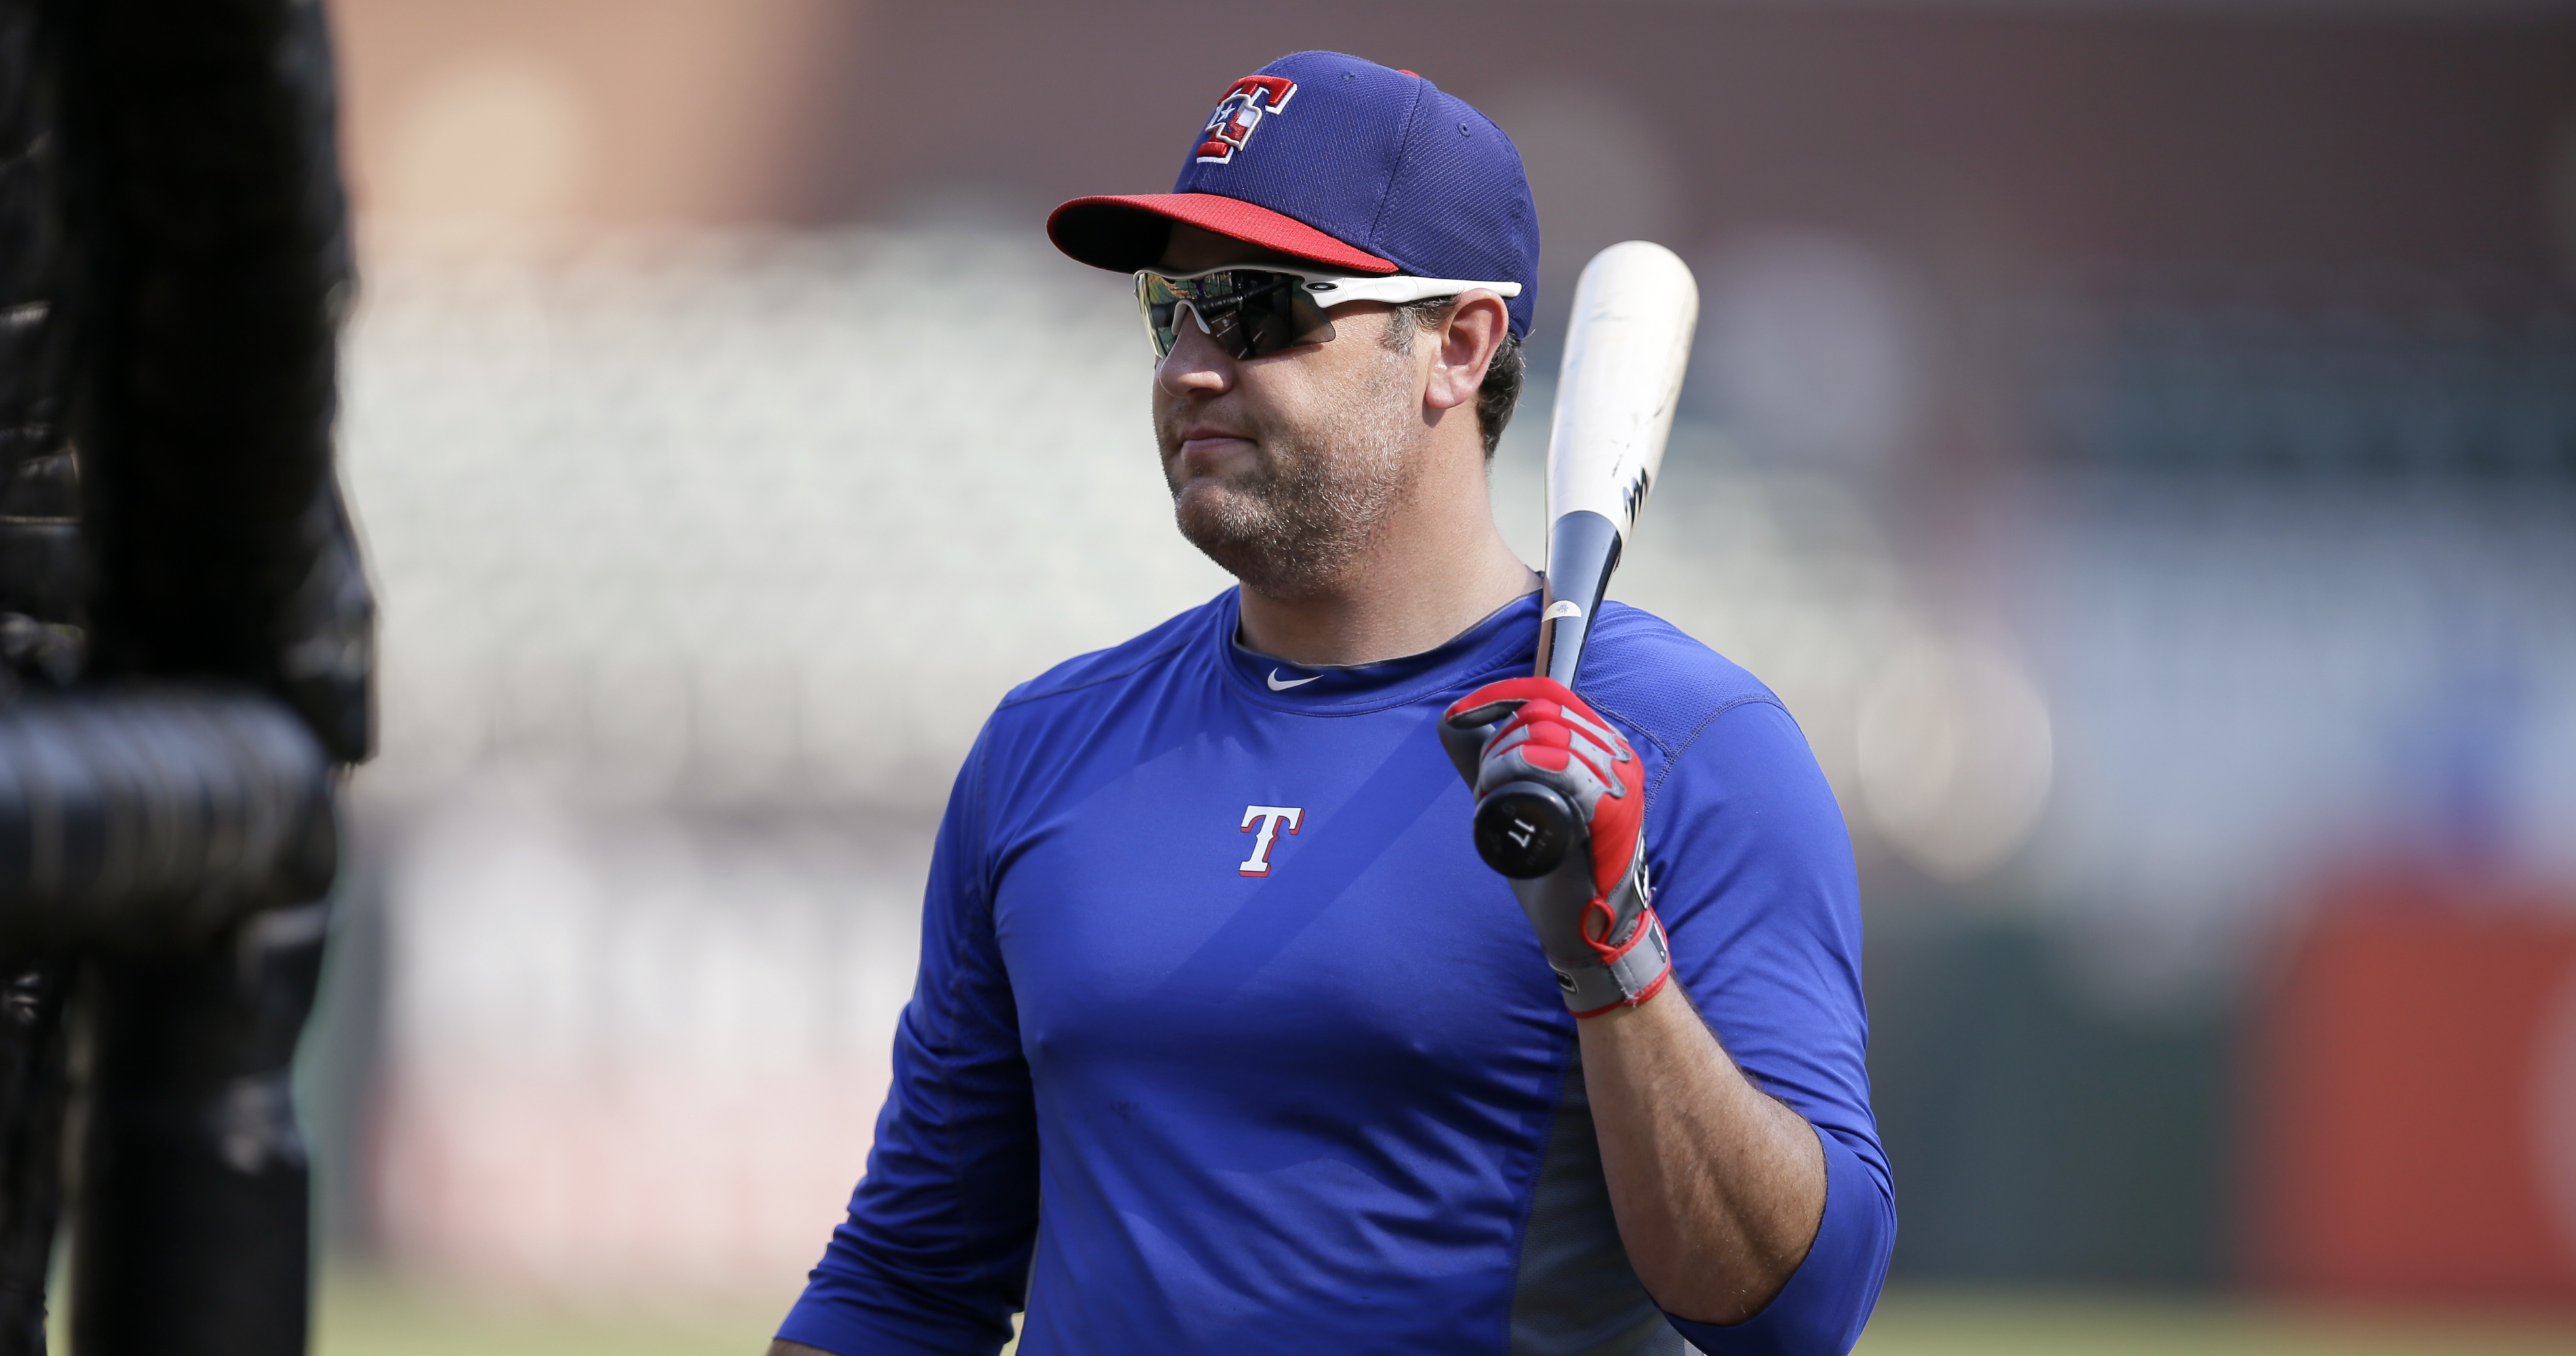 HOUSTON, TX - AUGUST 05: Former Houston Lance Berkman guess speaker for  Bagwell's being honored for his Hall of Fame induction prior to an MLB game  between the Houston Astros and the